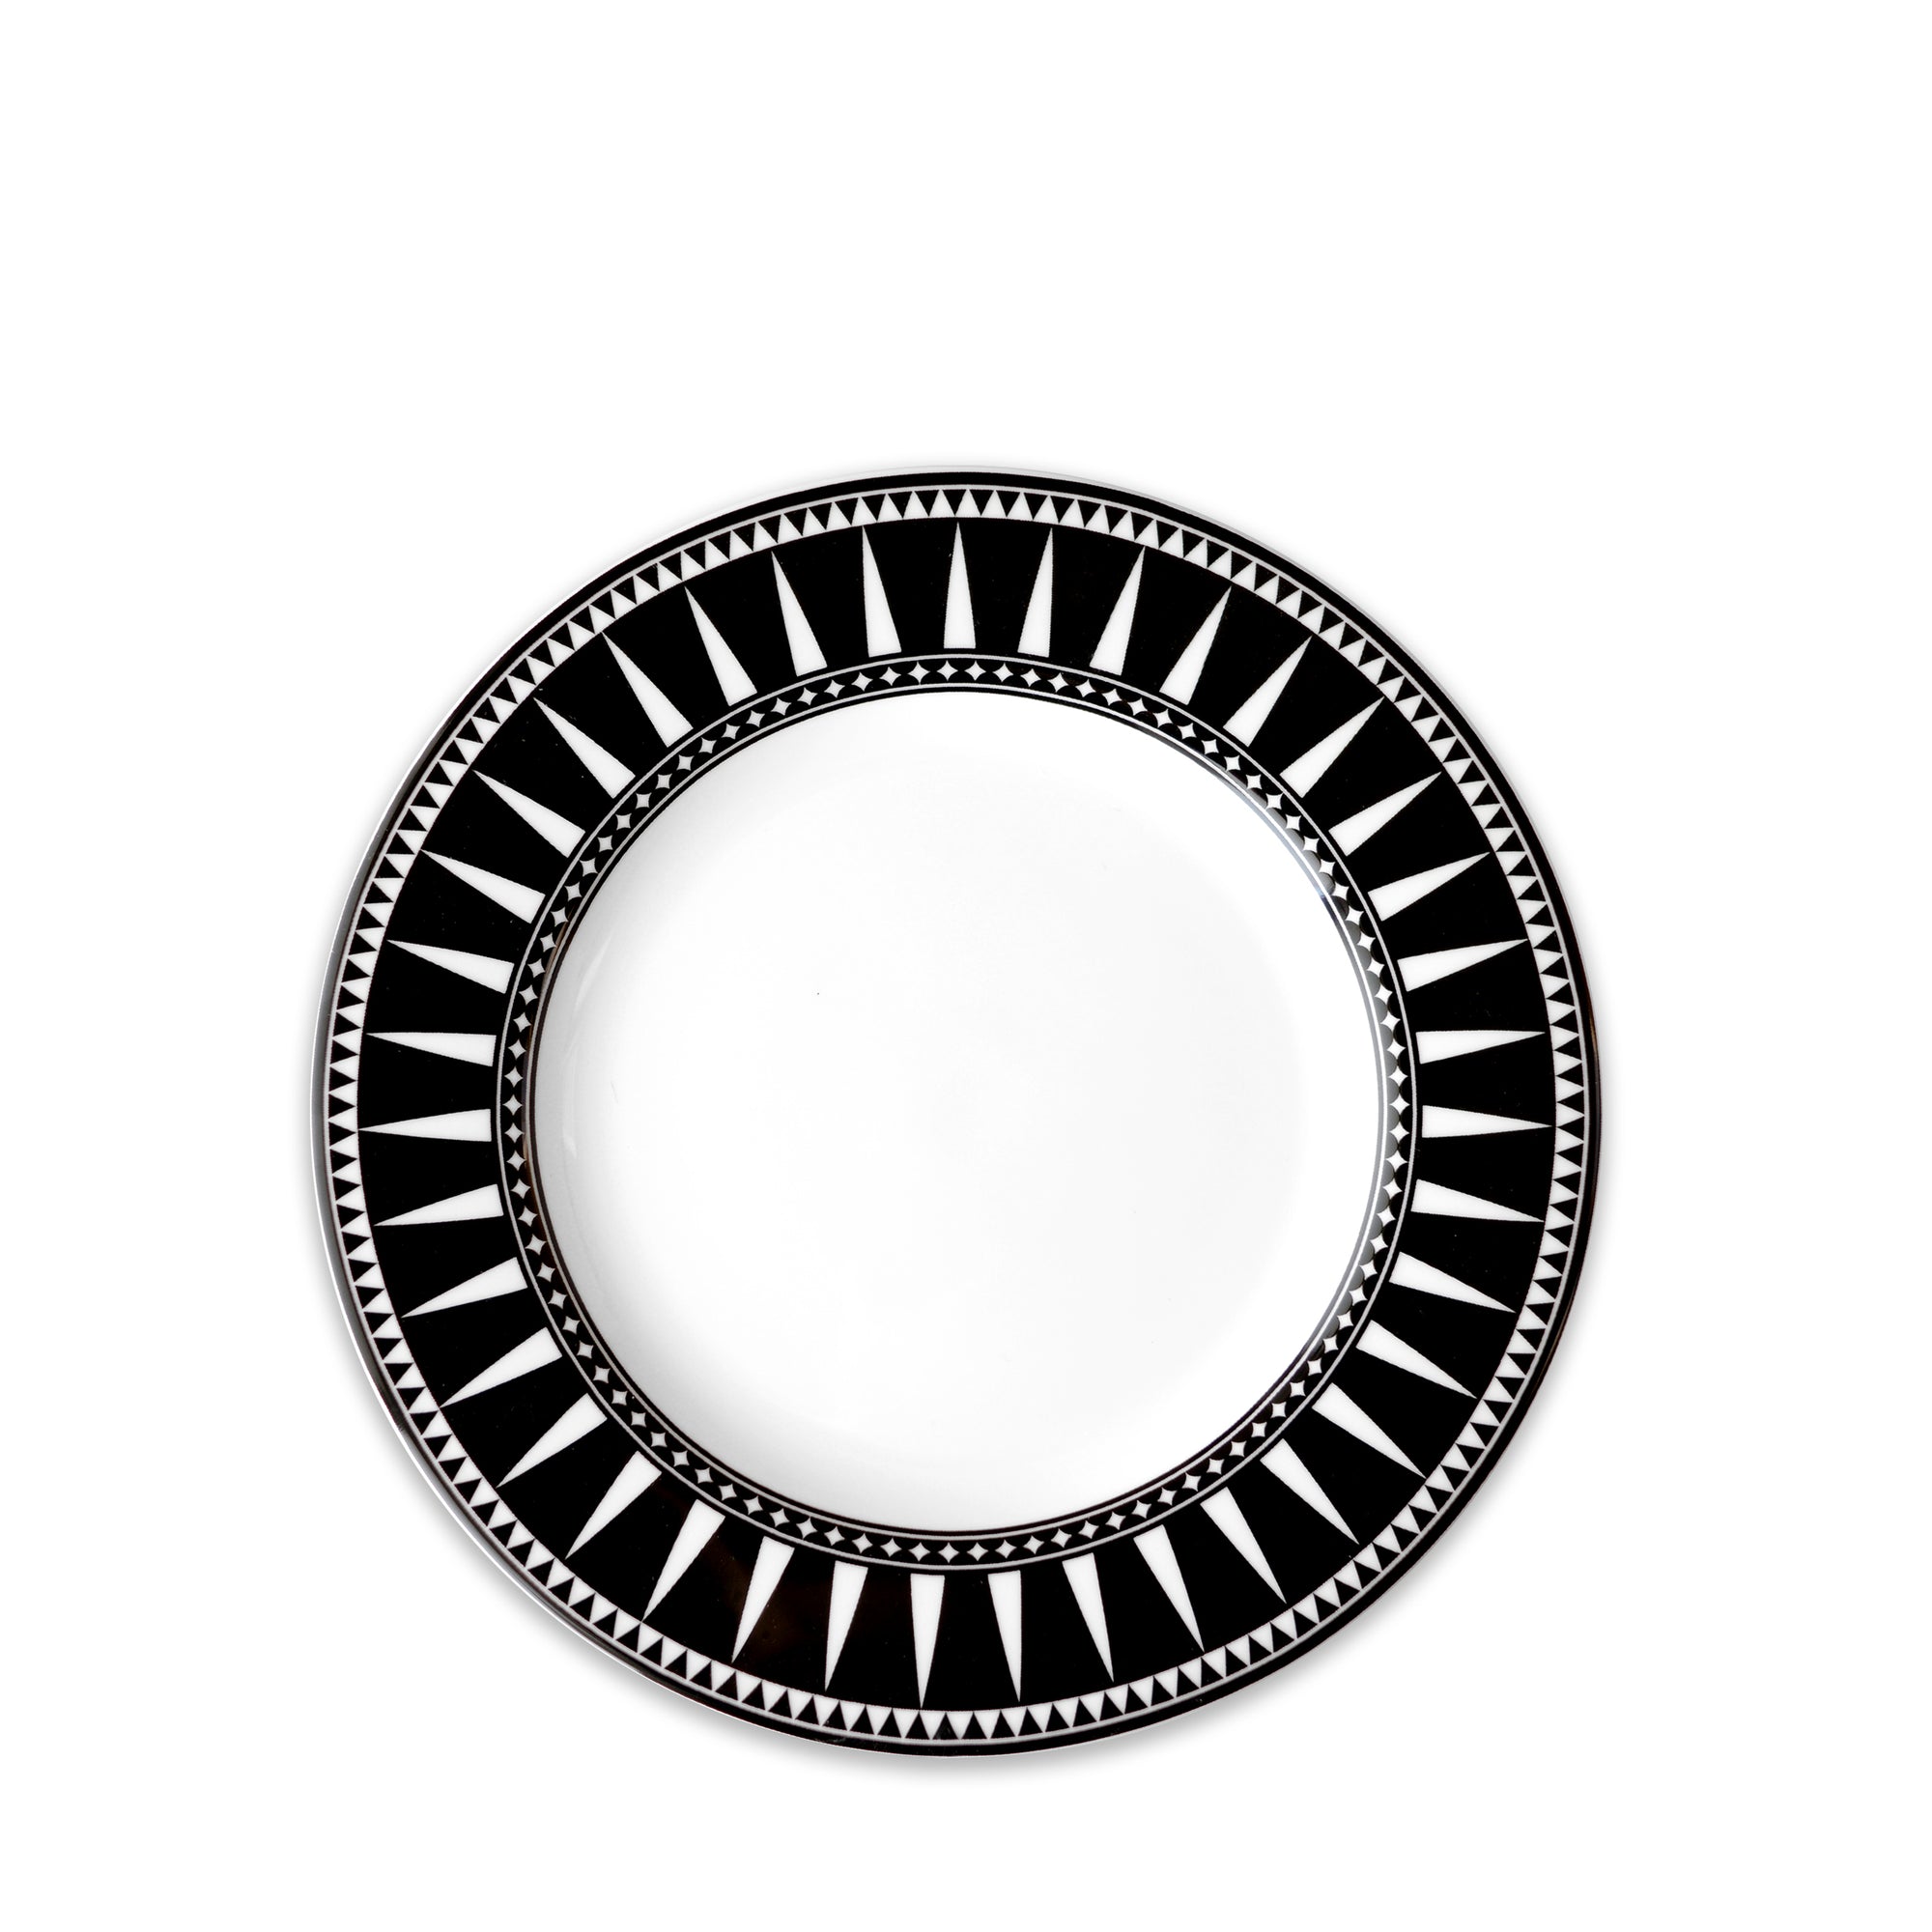 A high-fired porcelain Marrakech Rimmed Salad Plate by Caskata Artisanal Home, adorned with a decorative black geometric pattern around the rim, featuring alternating triangles and small dot details.